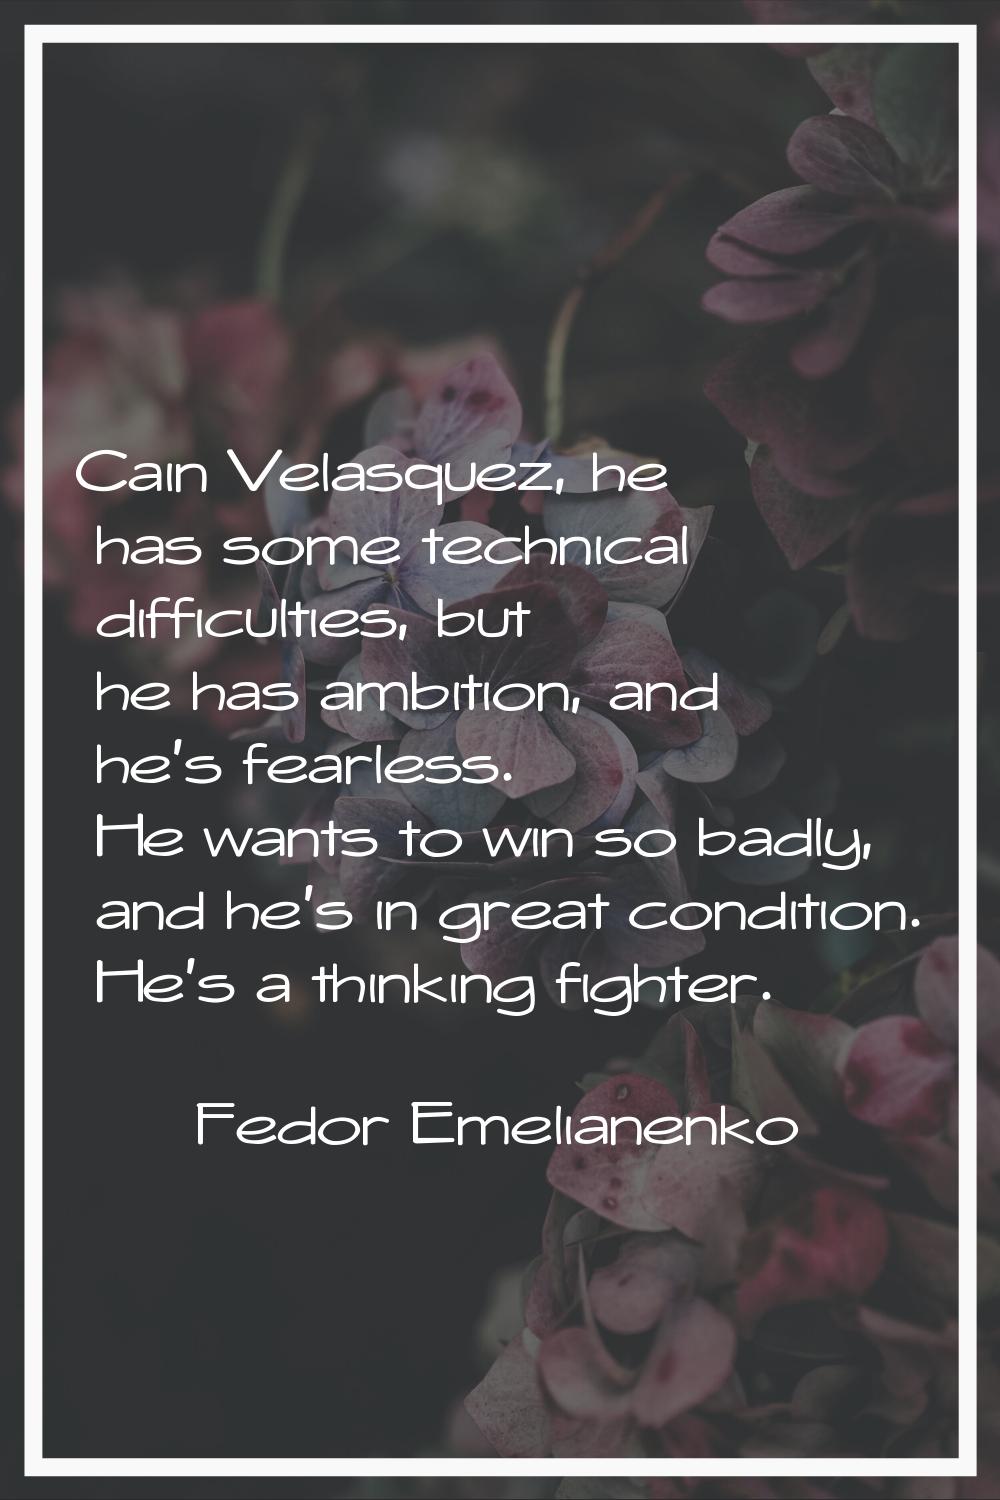 Cain Velasquez, he has some technical difficulties, but he has ambition, and he's fearless. He want